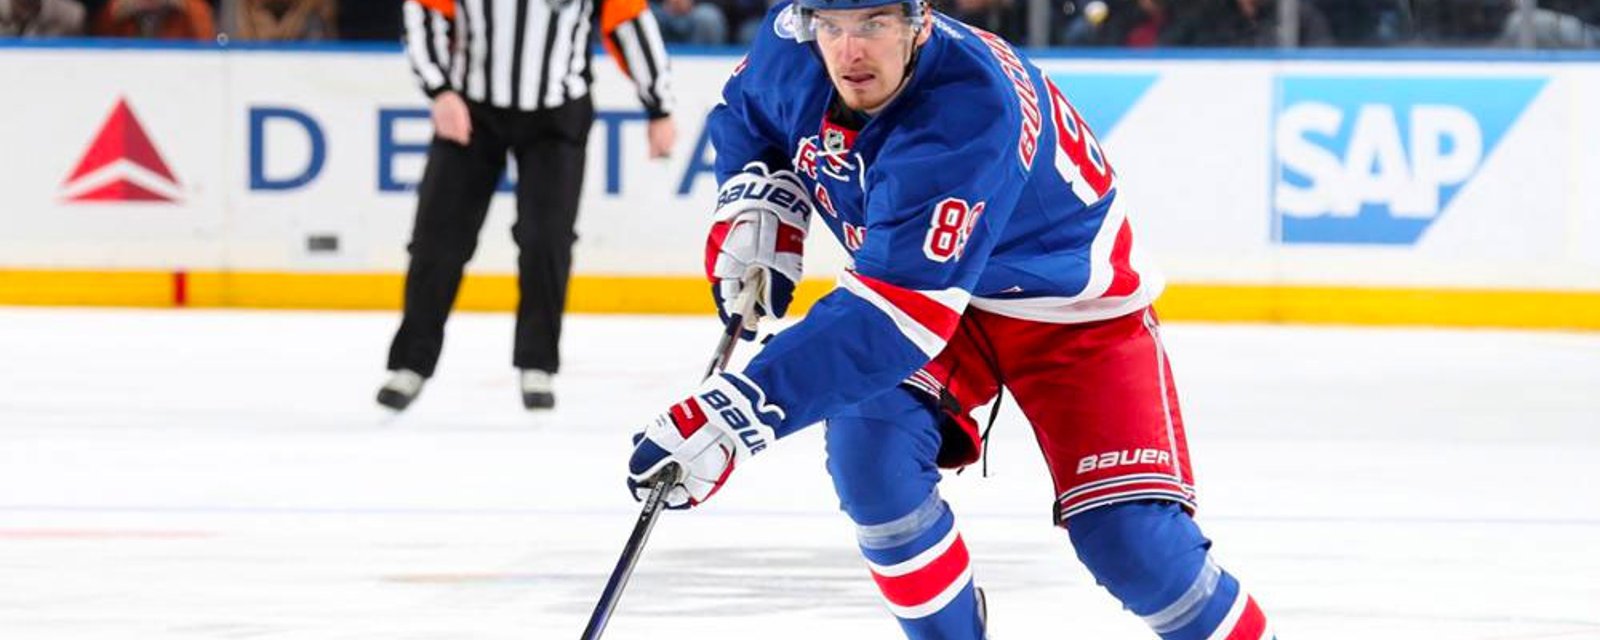 Buchnevich’s name floated in trade proposal